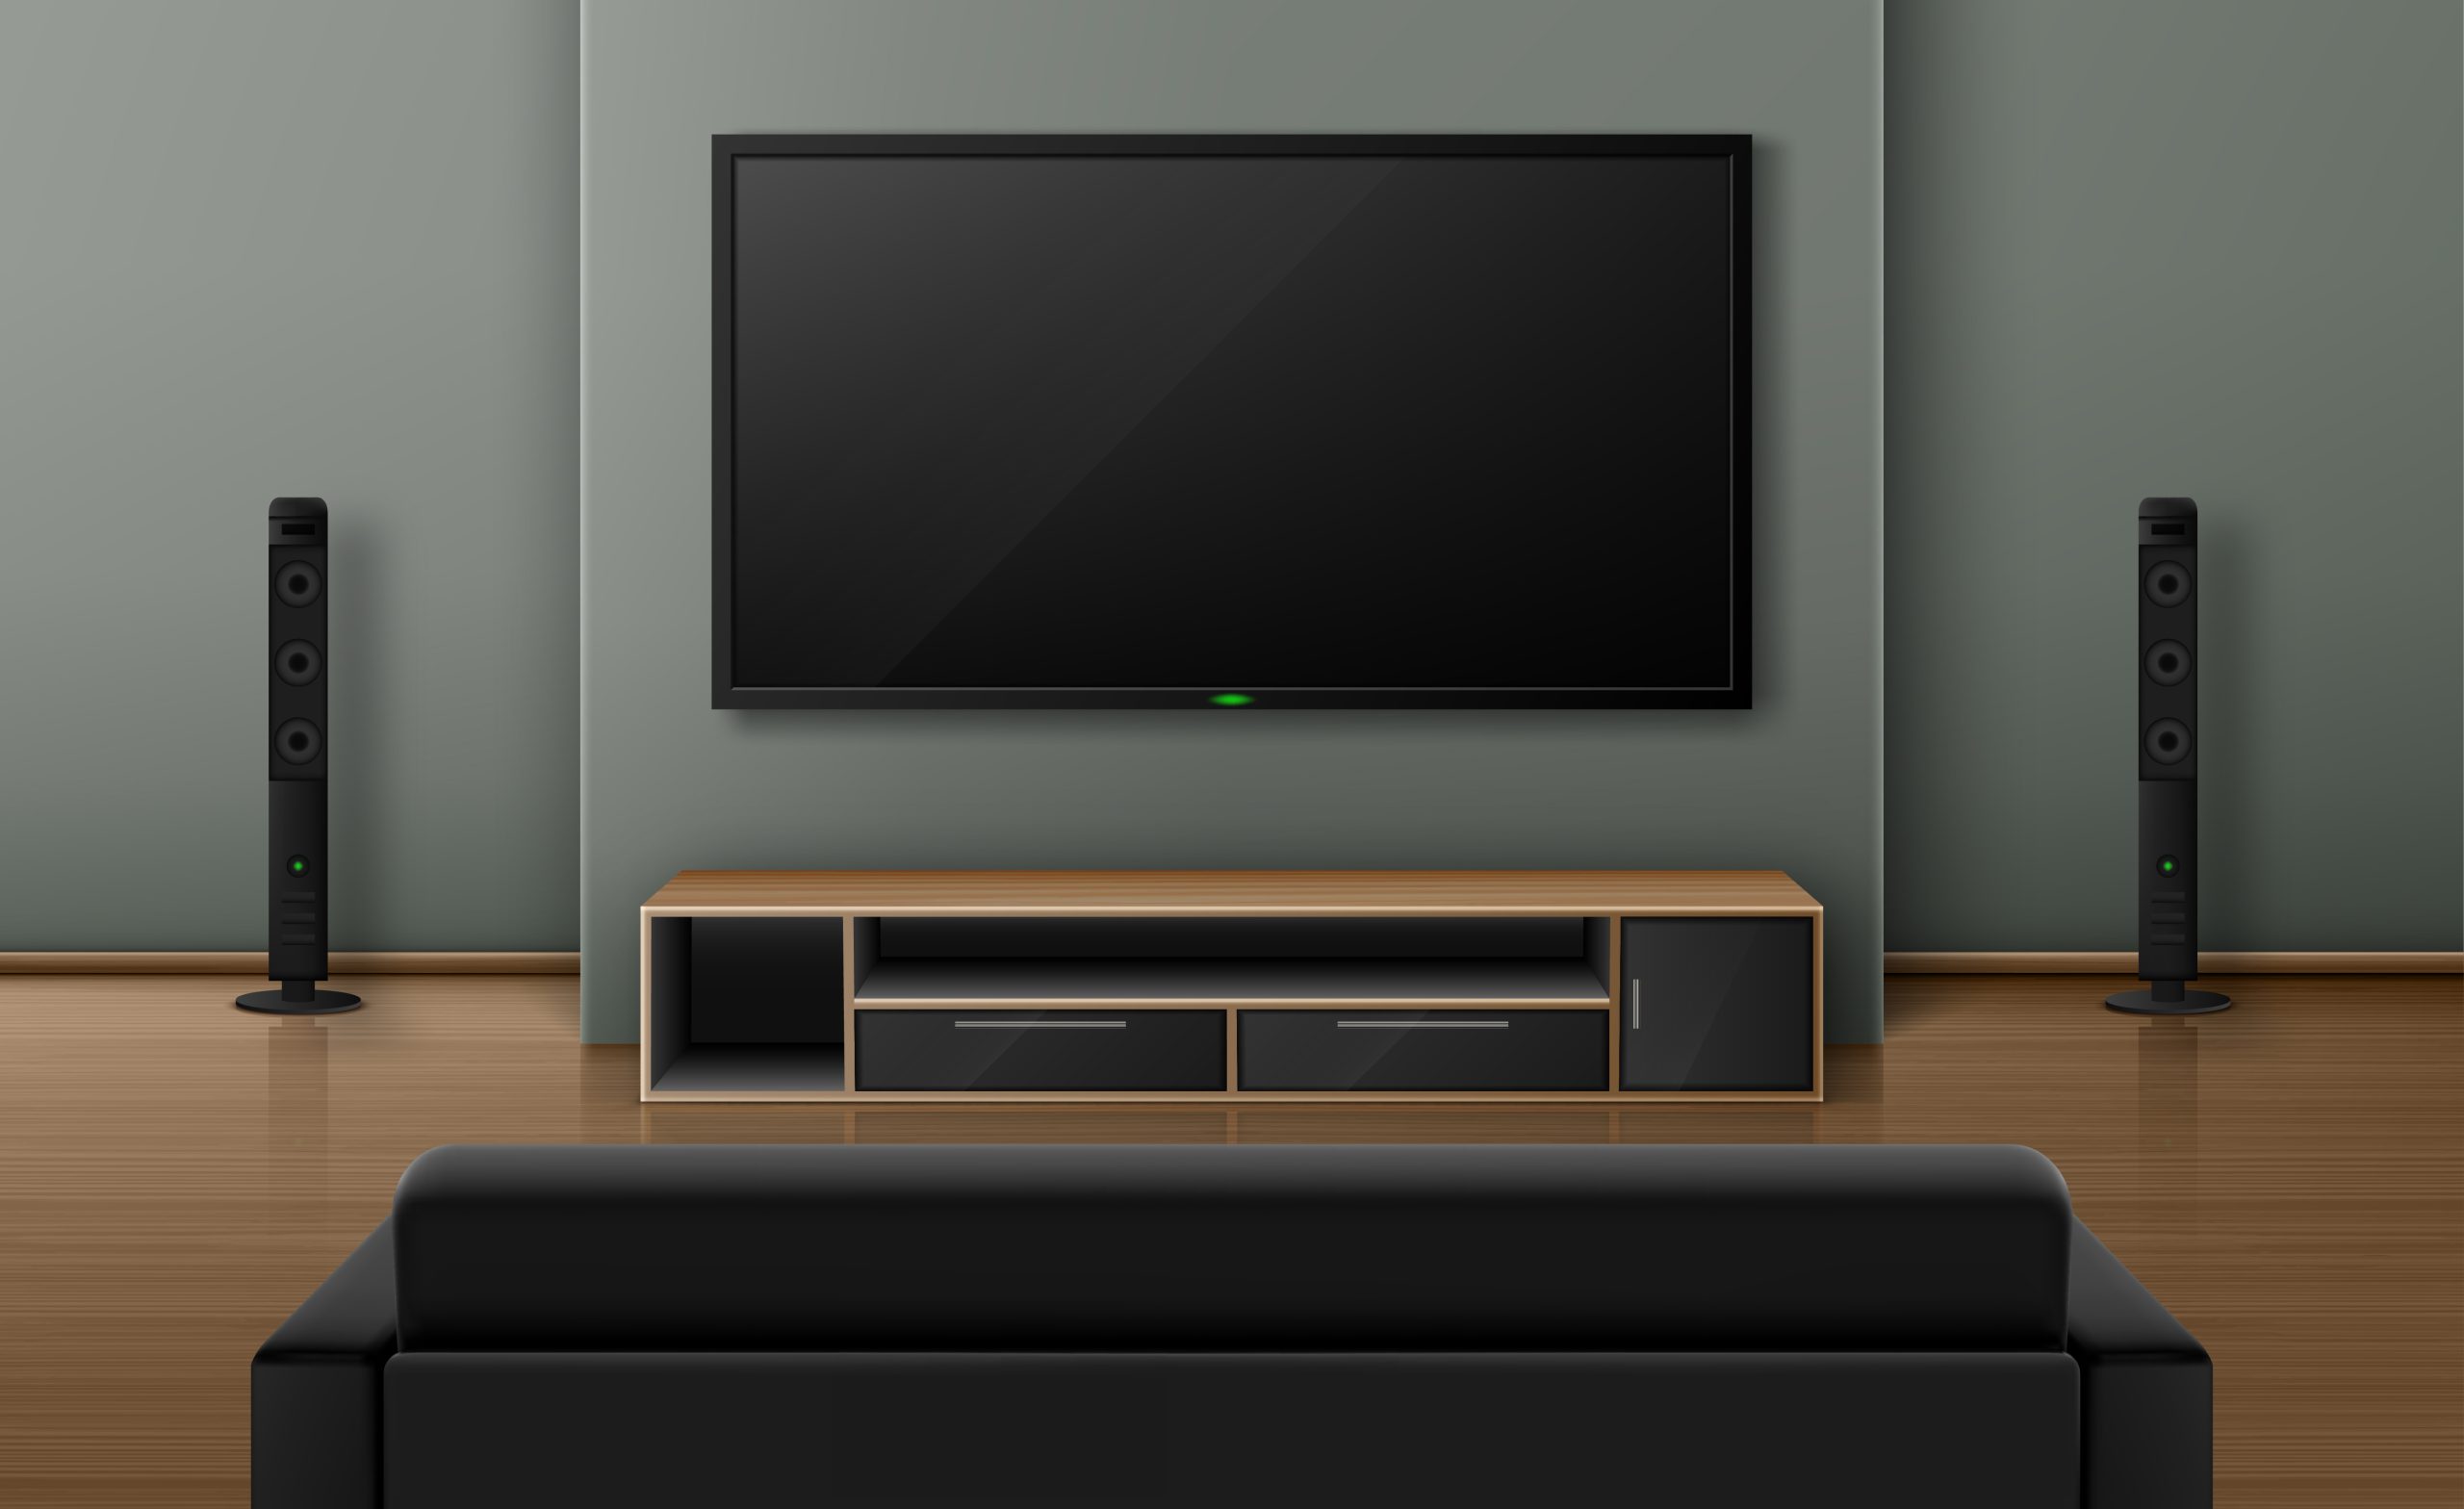 Home theater system with television on wall, empty house apartment with wooden floor. 